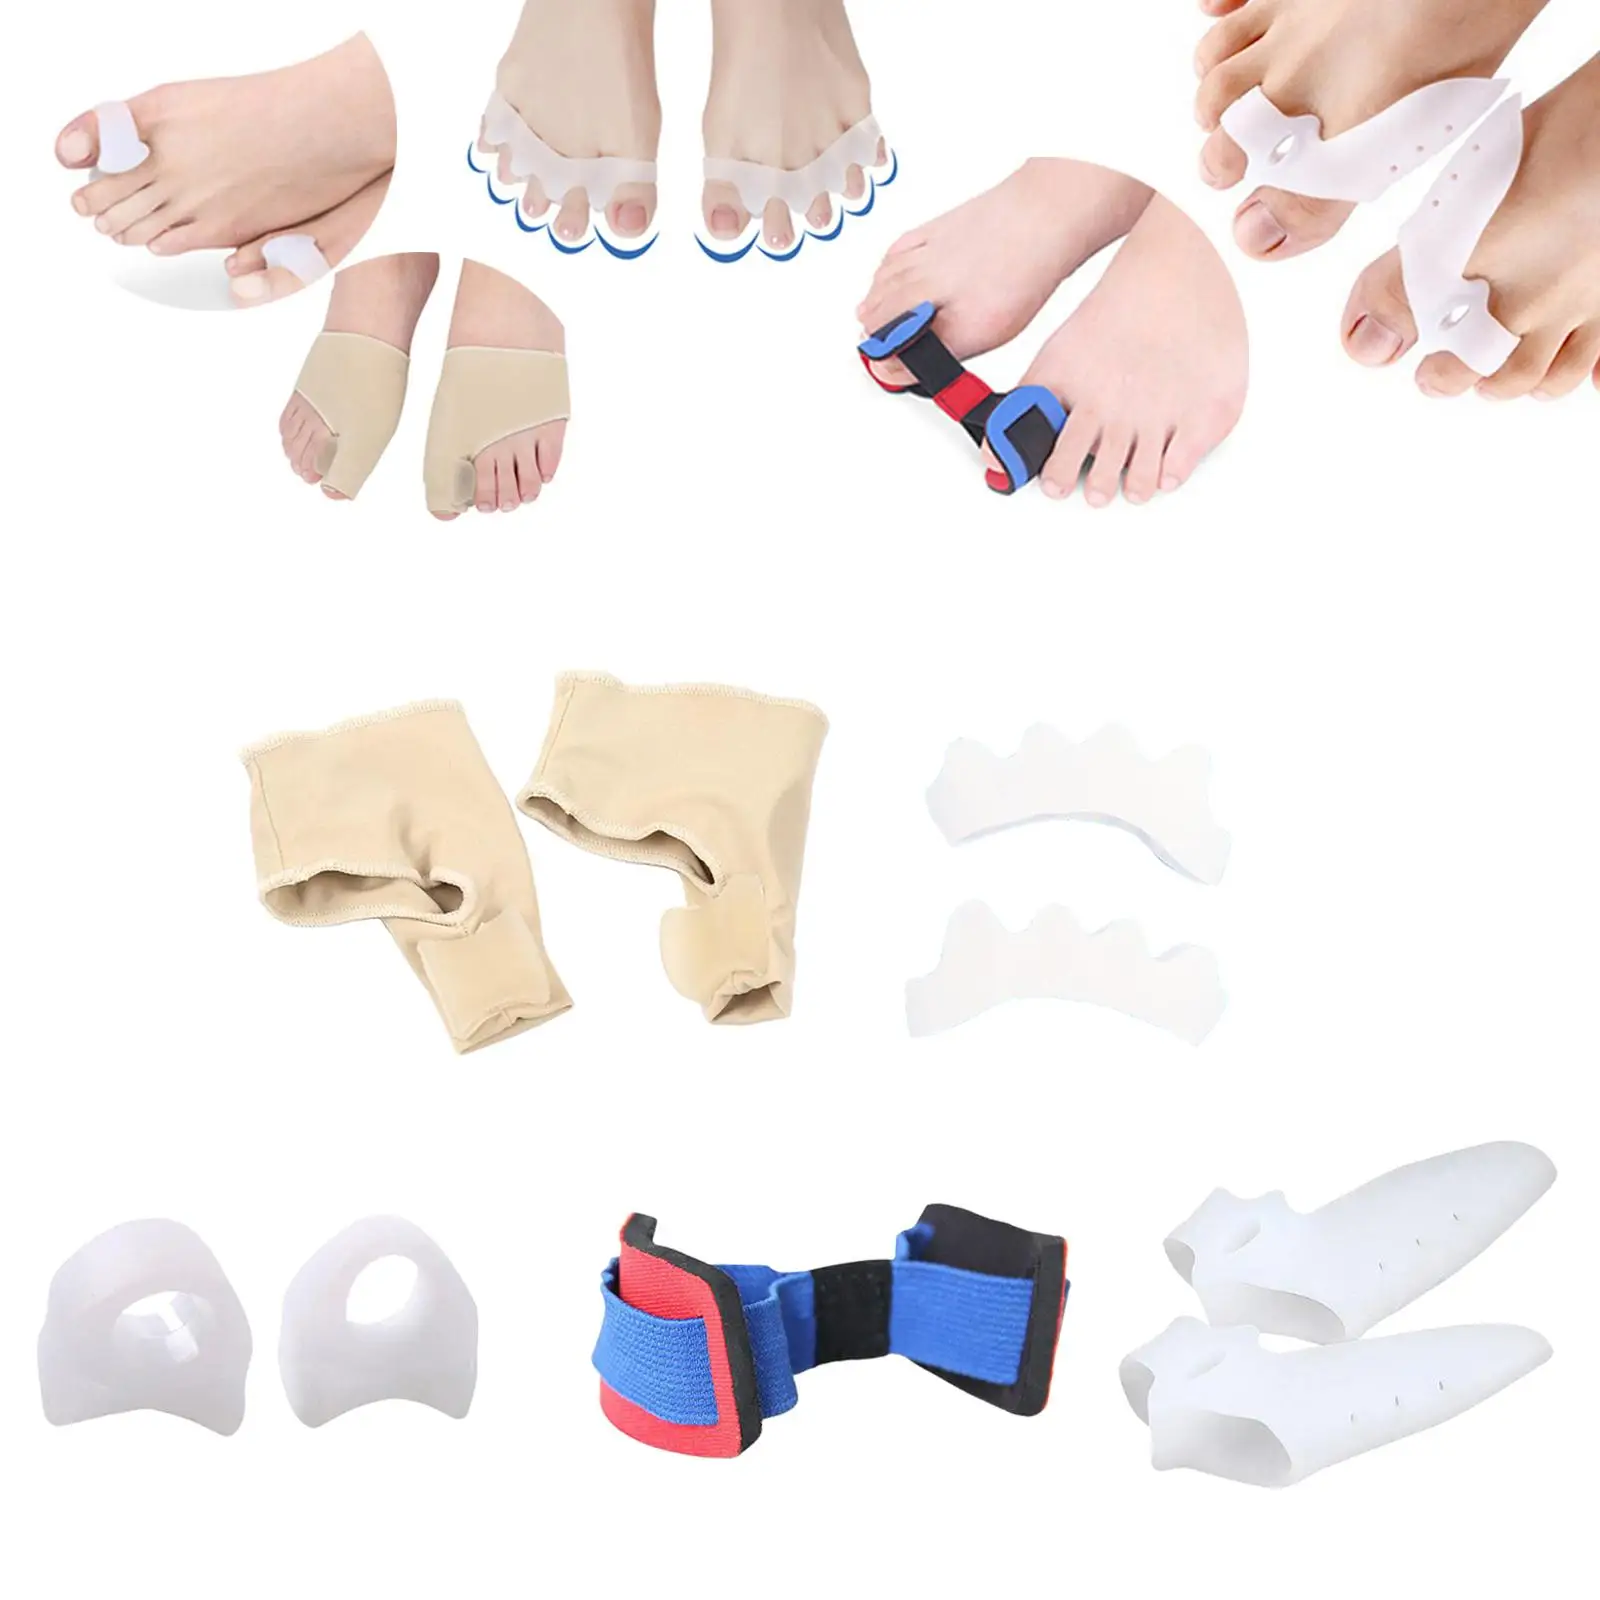 Set of 9 Bunion Corrector Bunion Relief Sleeves Kit, Toe Spacer , Just Slip Them On and Get Rolling Premium Stretchable Reusable